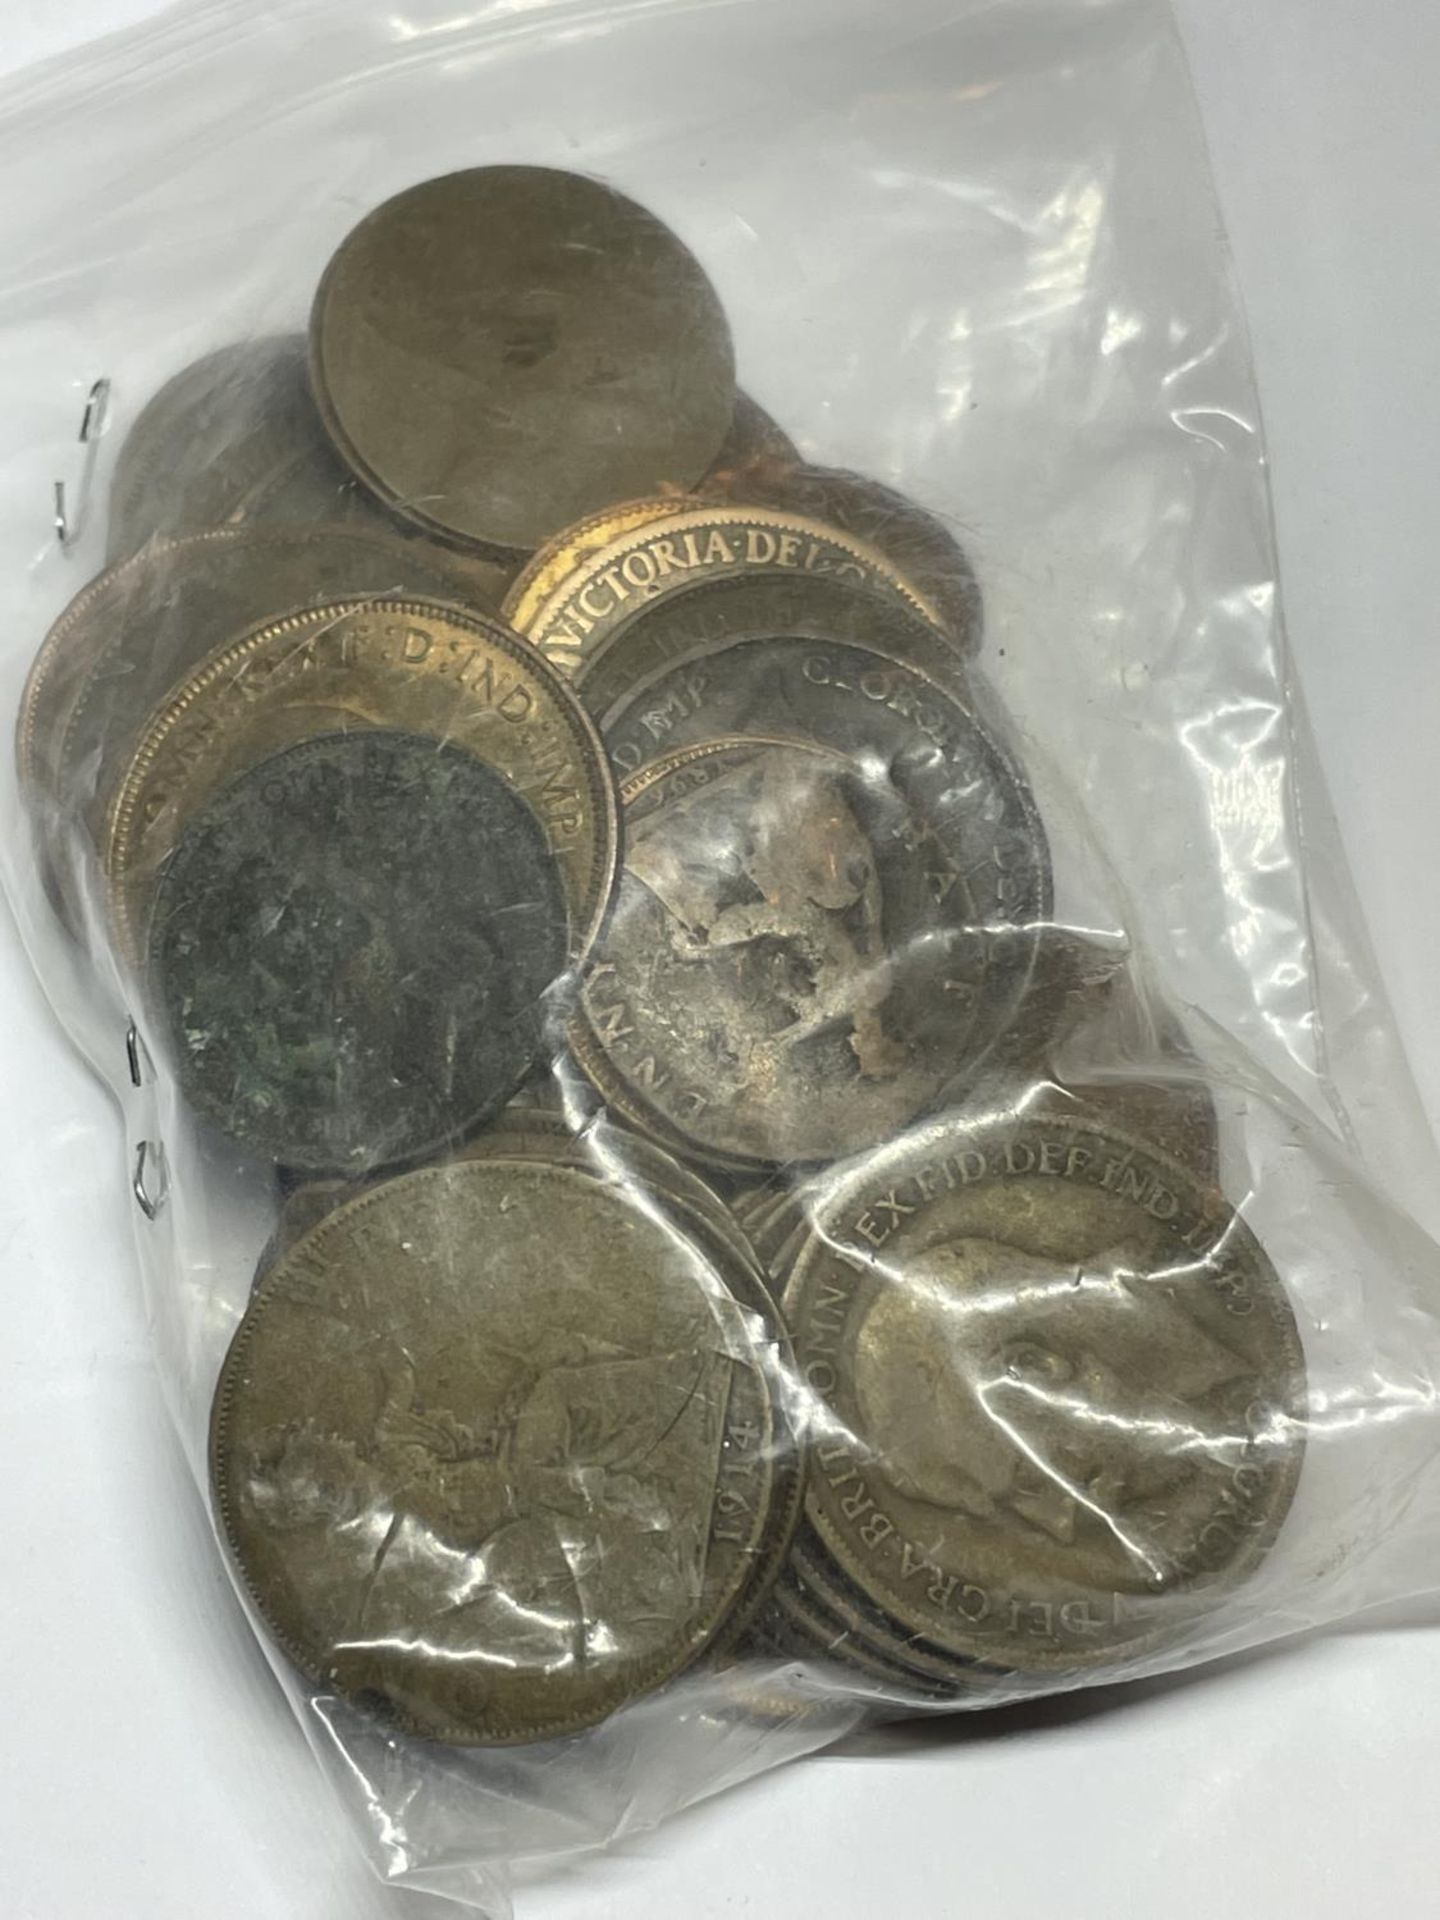 A LARGE QUANTITY OF COPPER COINS - Image 2 of 2